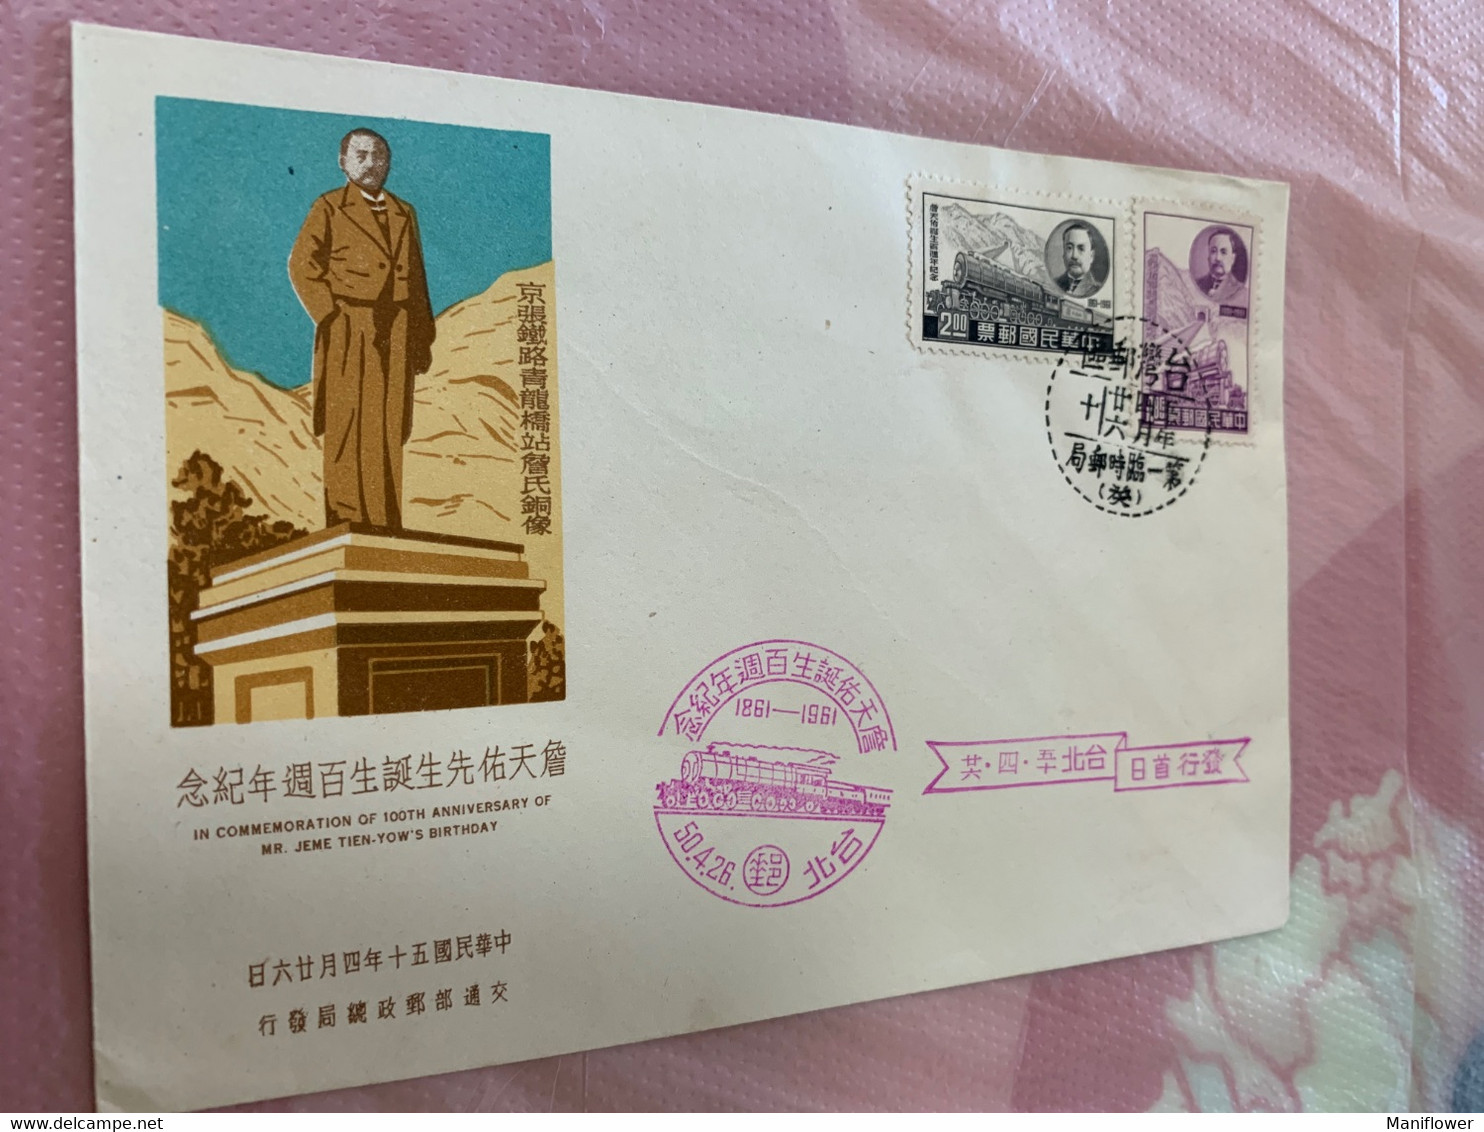 Taiwan Stamp FDC 1961 Train Locomotive Cover - Covers & Documents